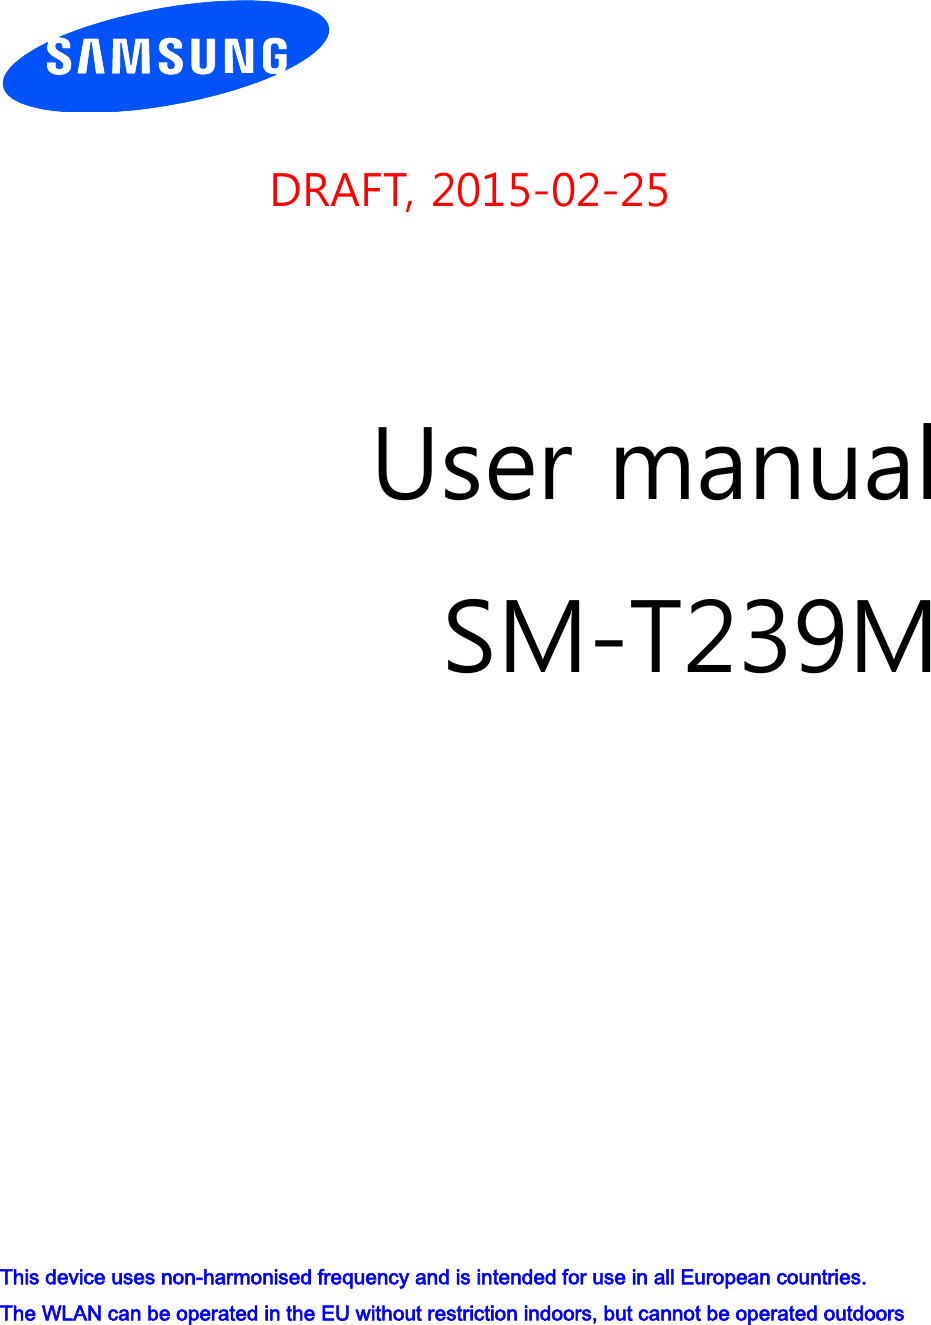     DRAFT, 2015-02-25     User manual SM-T239M                This device uses non-harmonised frequency and is intended for use in all European countries.   The WLAN can be operated in the EU without restriction indoors, but cannot be operated outdoors 